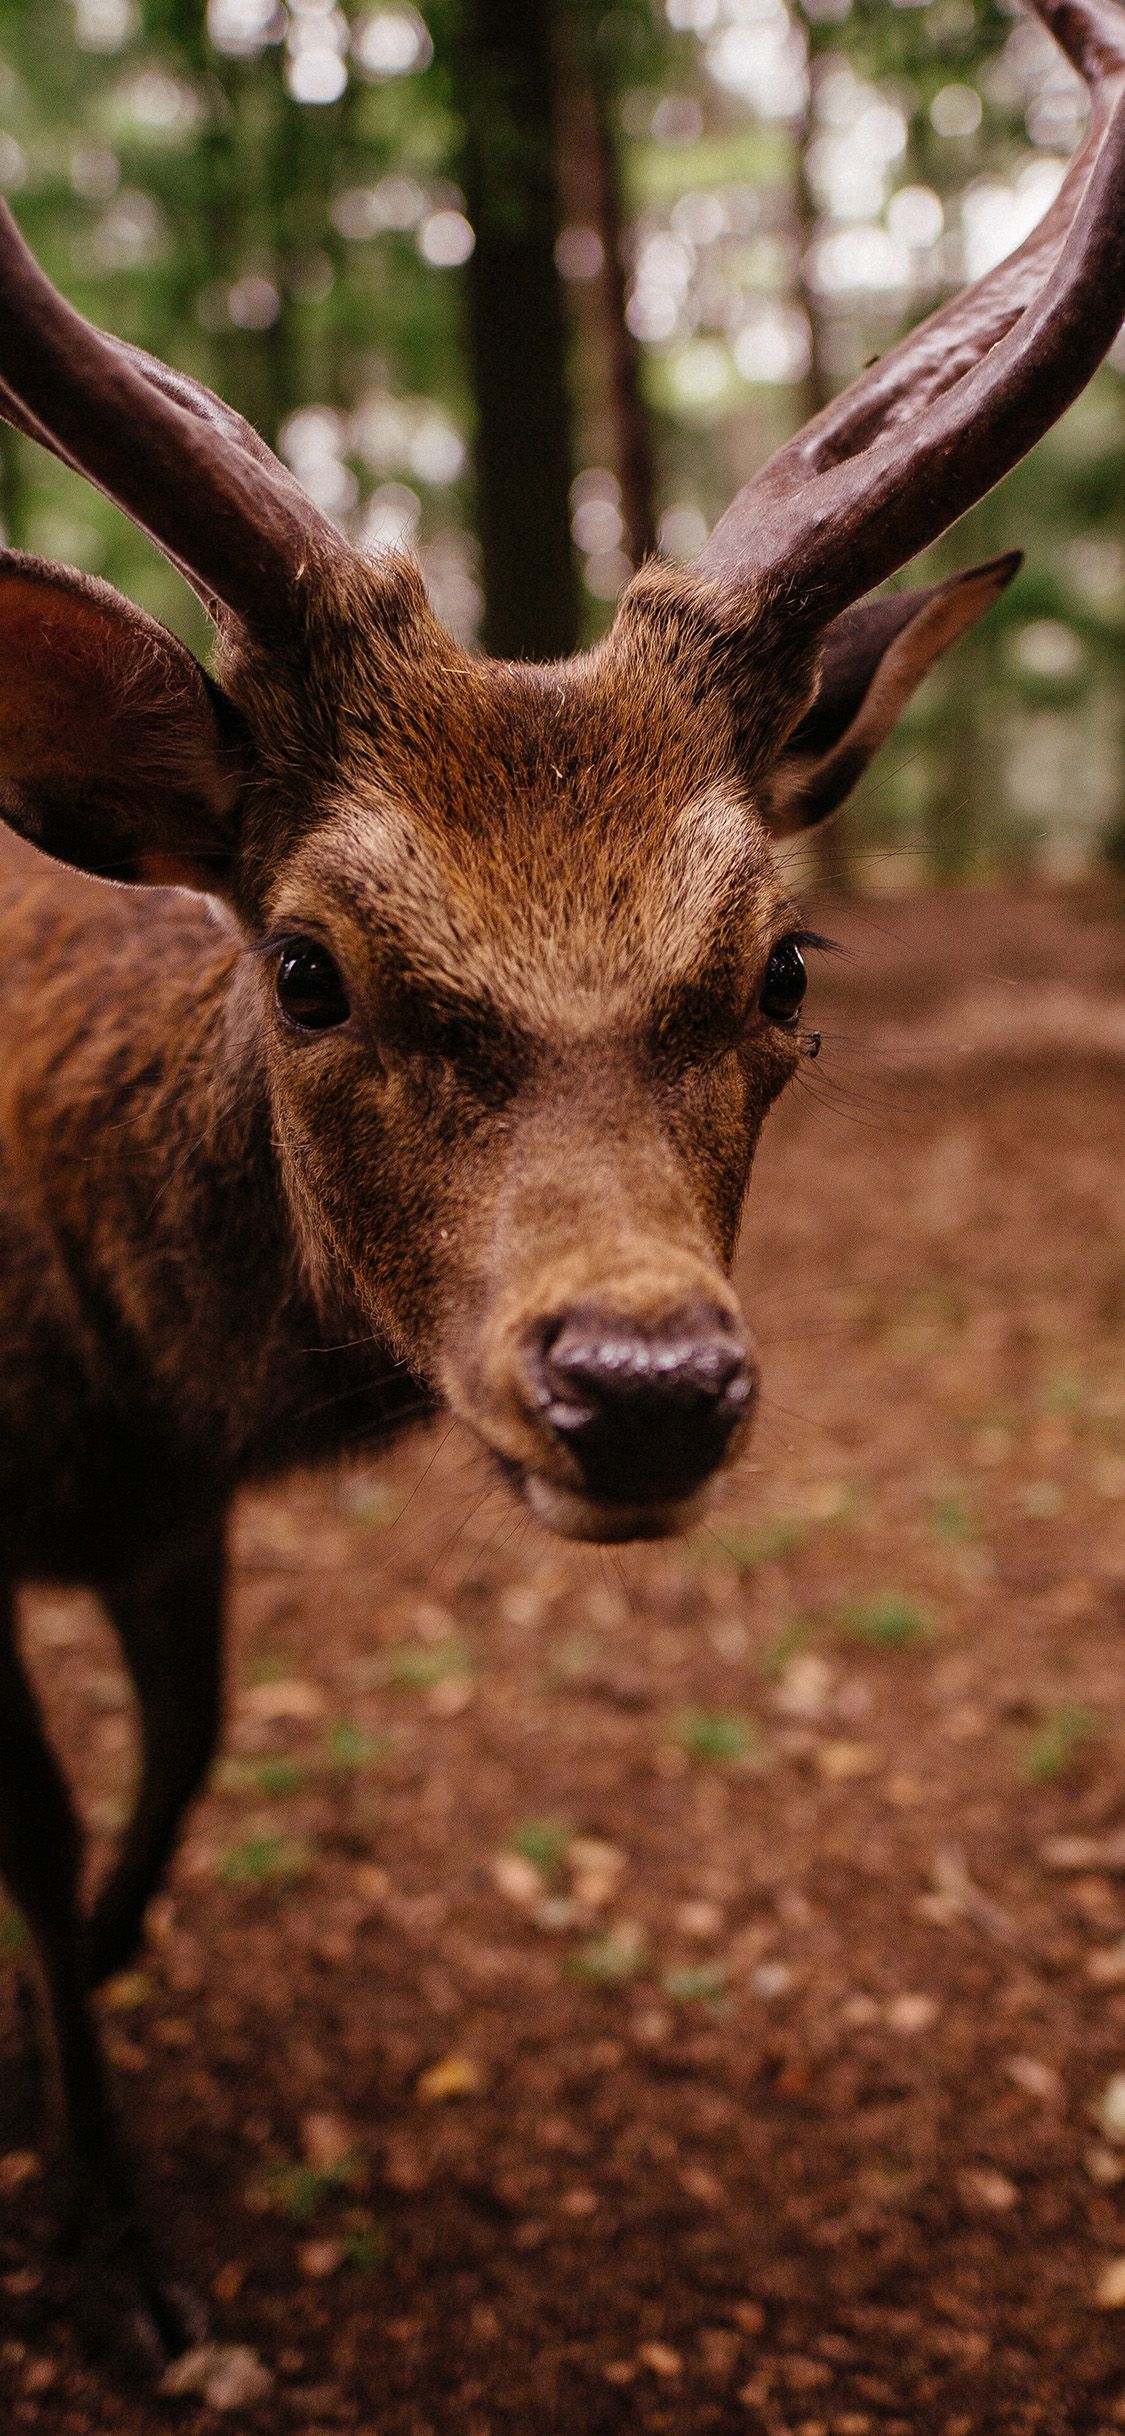 A close up of a deer in the forest. - Deer